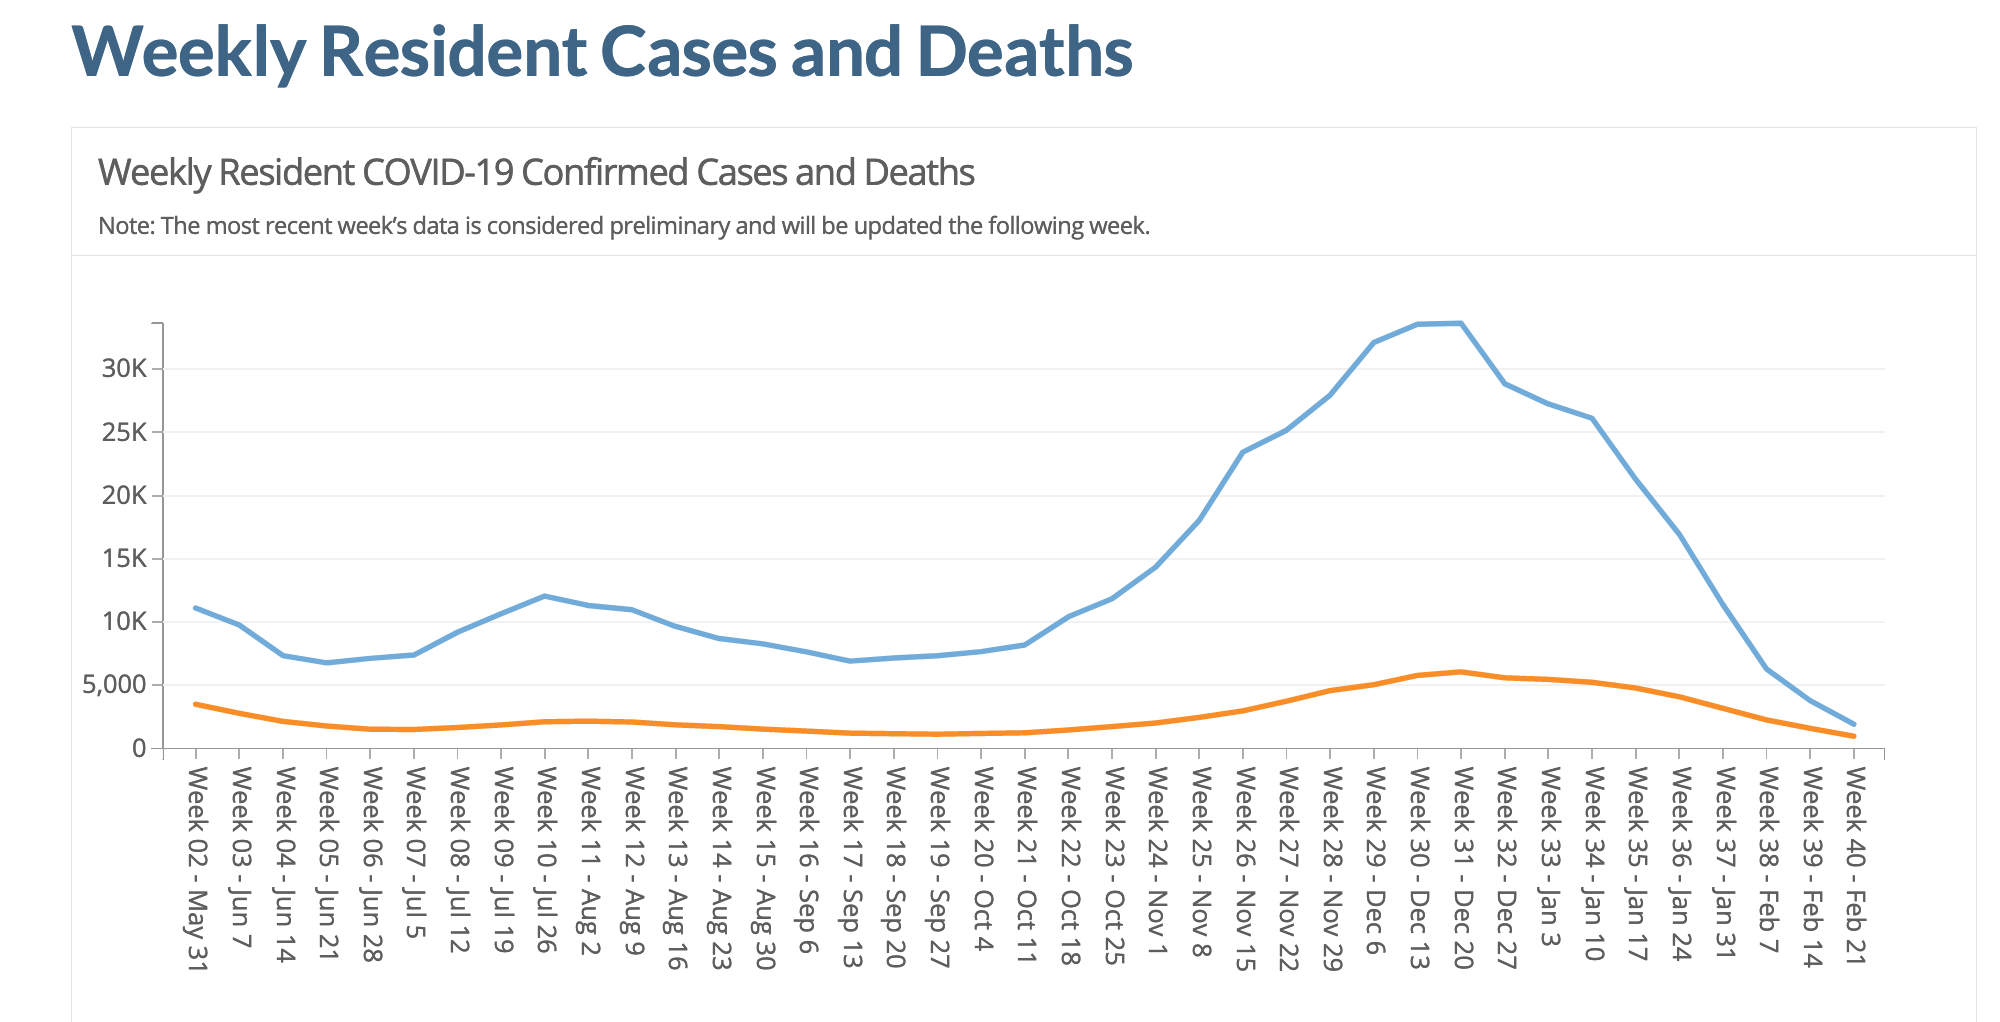 Line graph with two lines showing weekly confirmed cases and deaths for nursing home residents from May 31 2020 through February 21 2021. Weekly cases peak above 30,000 in mid- to late December 2020 and decline to below 5,000 weekly cases. Weekly deaths peak just about 5,000 in December 2020 and then decline.